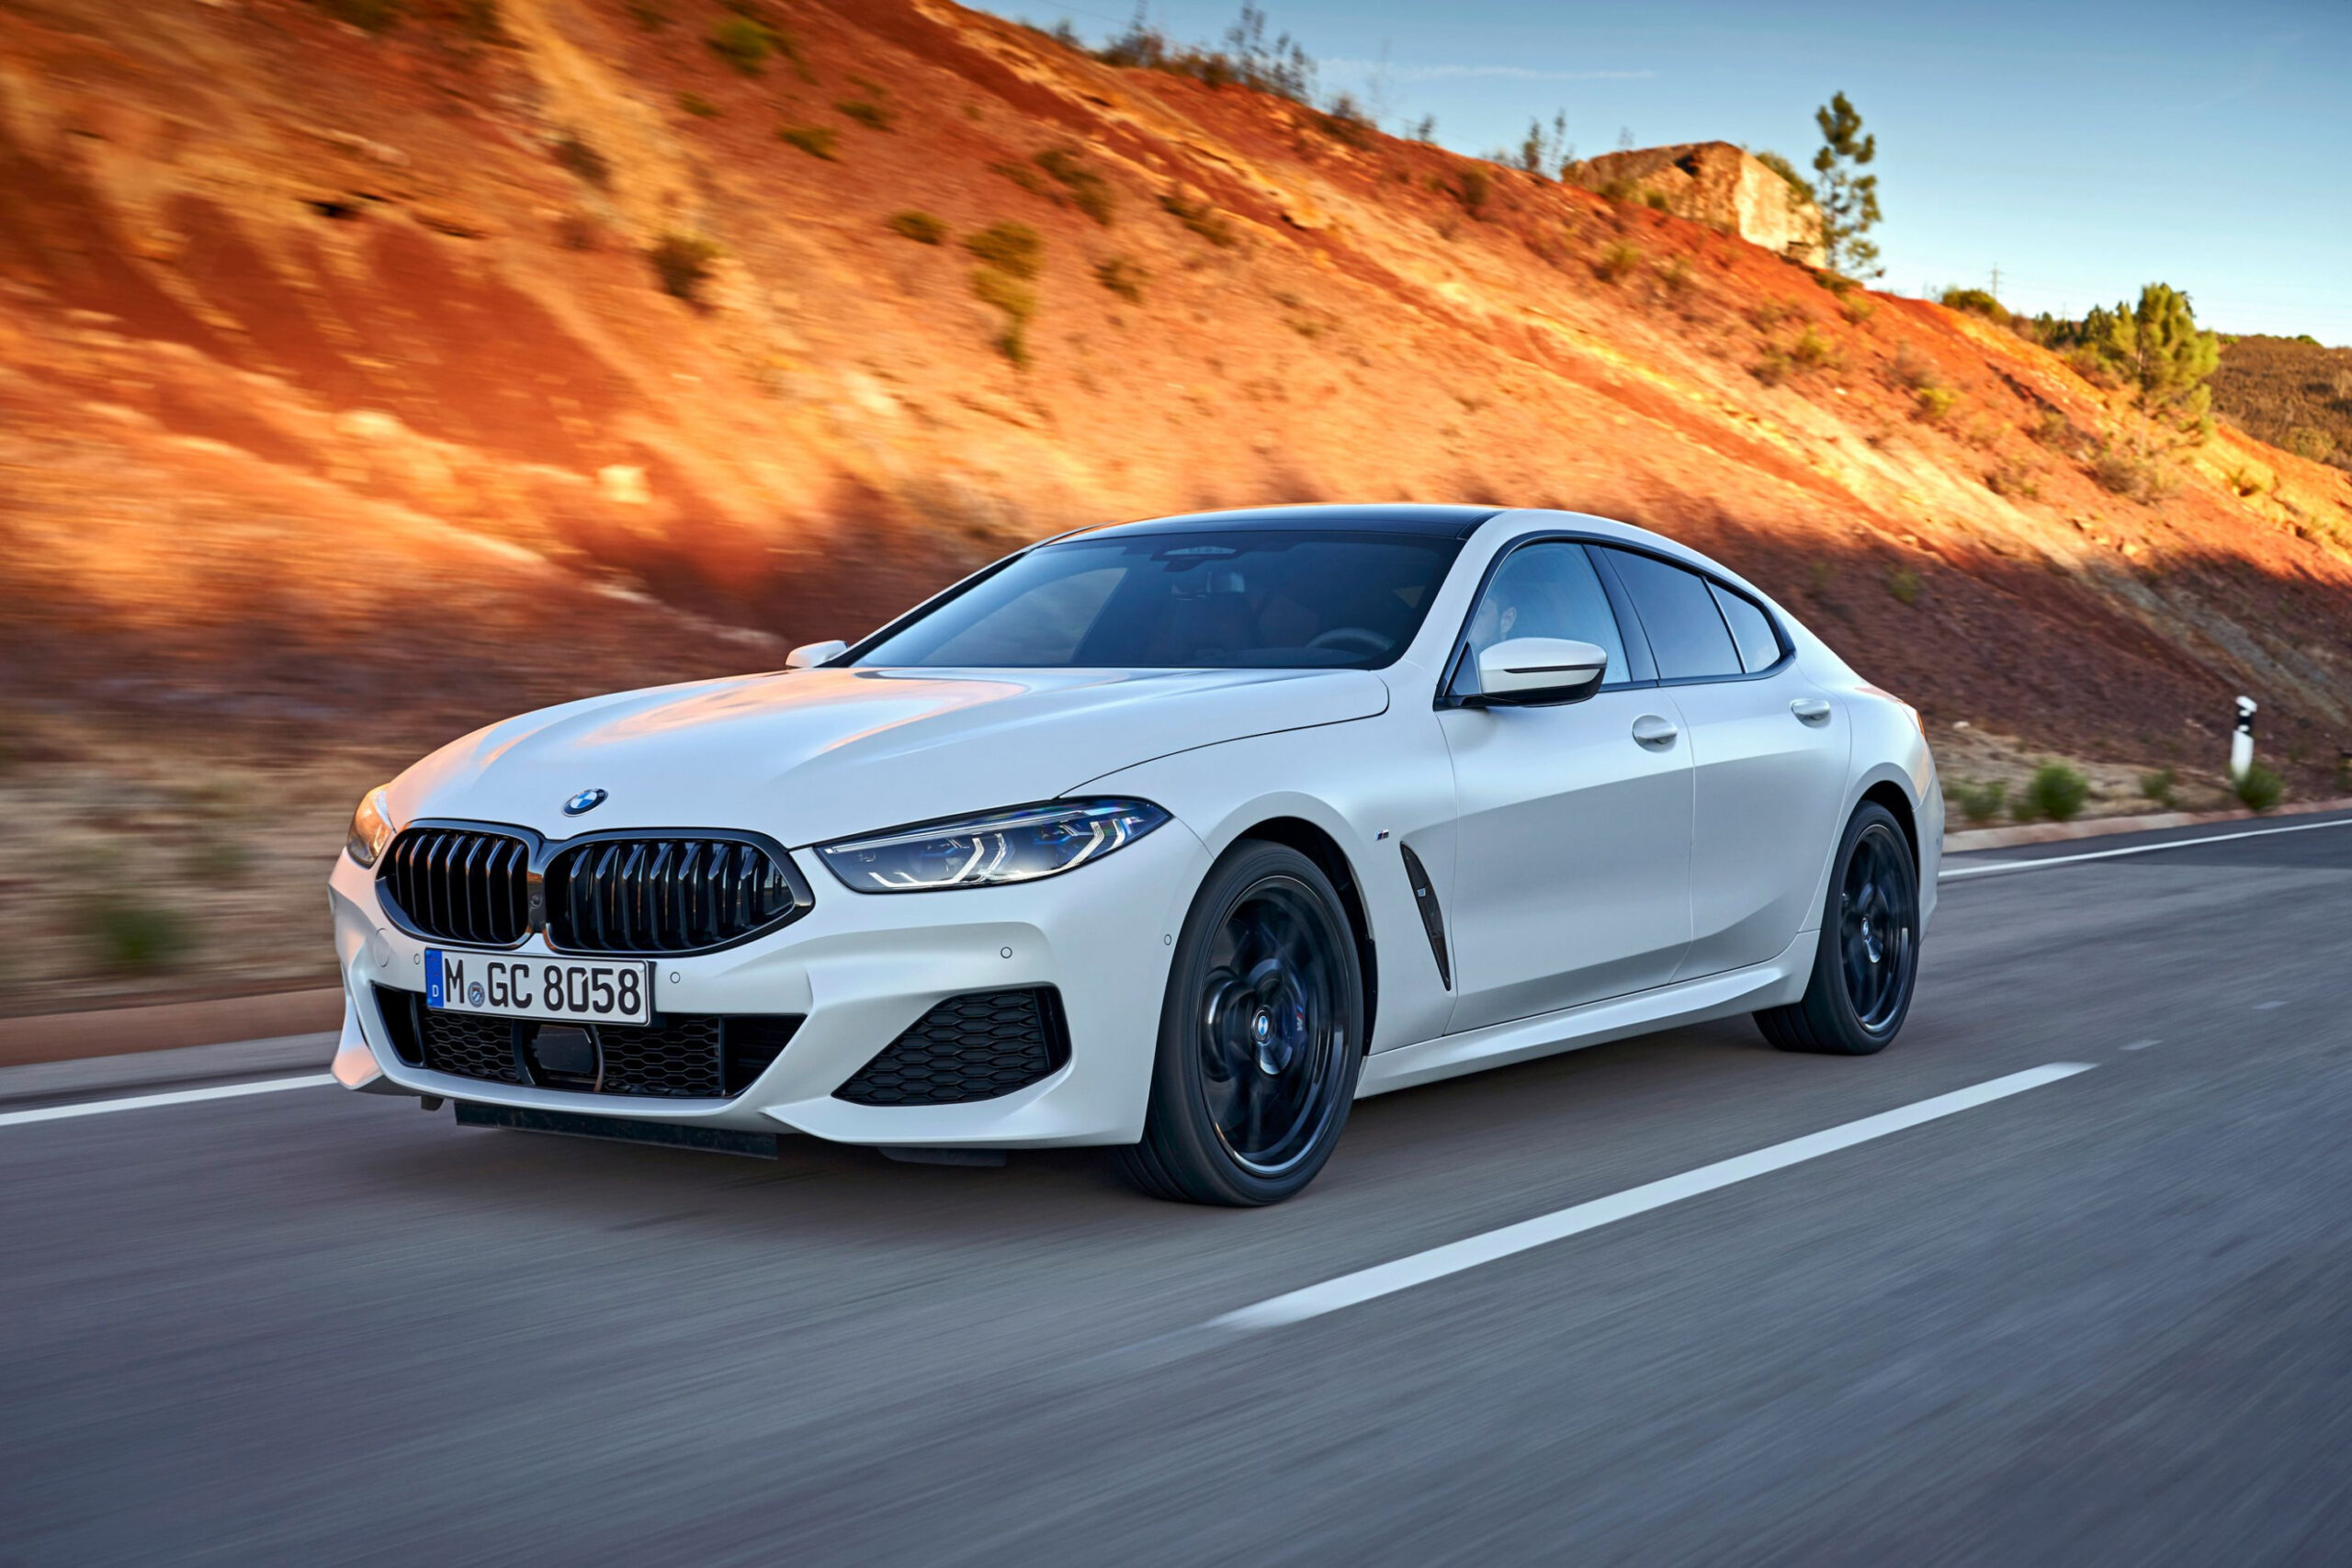 History bmw 8 series review